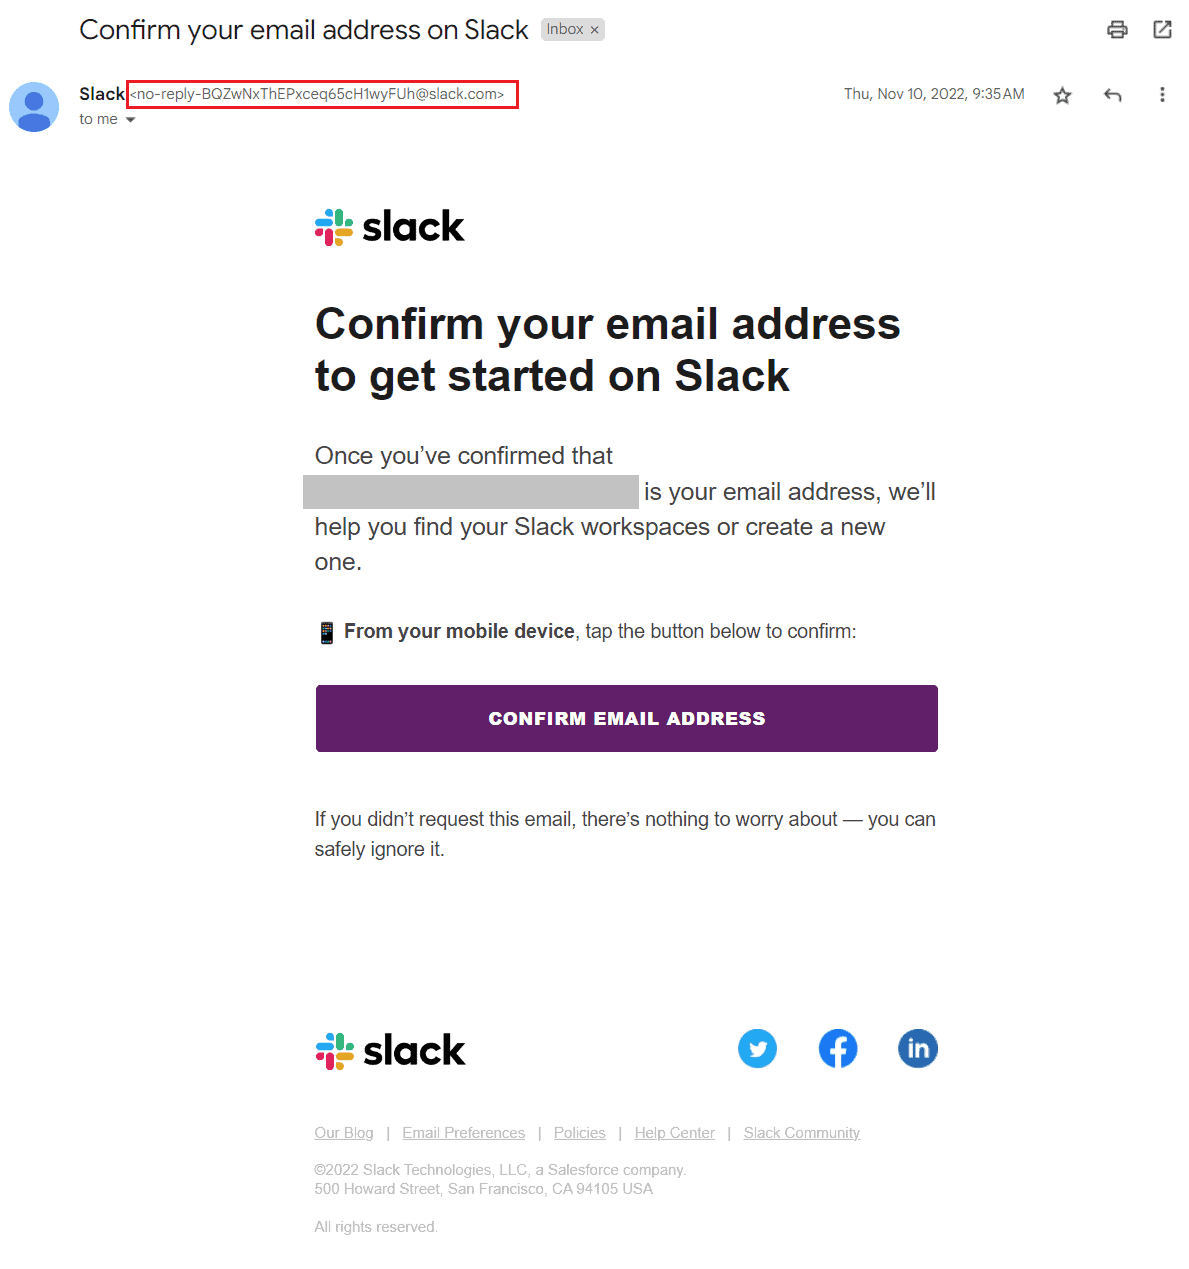 Email address confirmation example by Slack